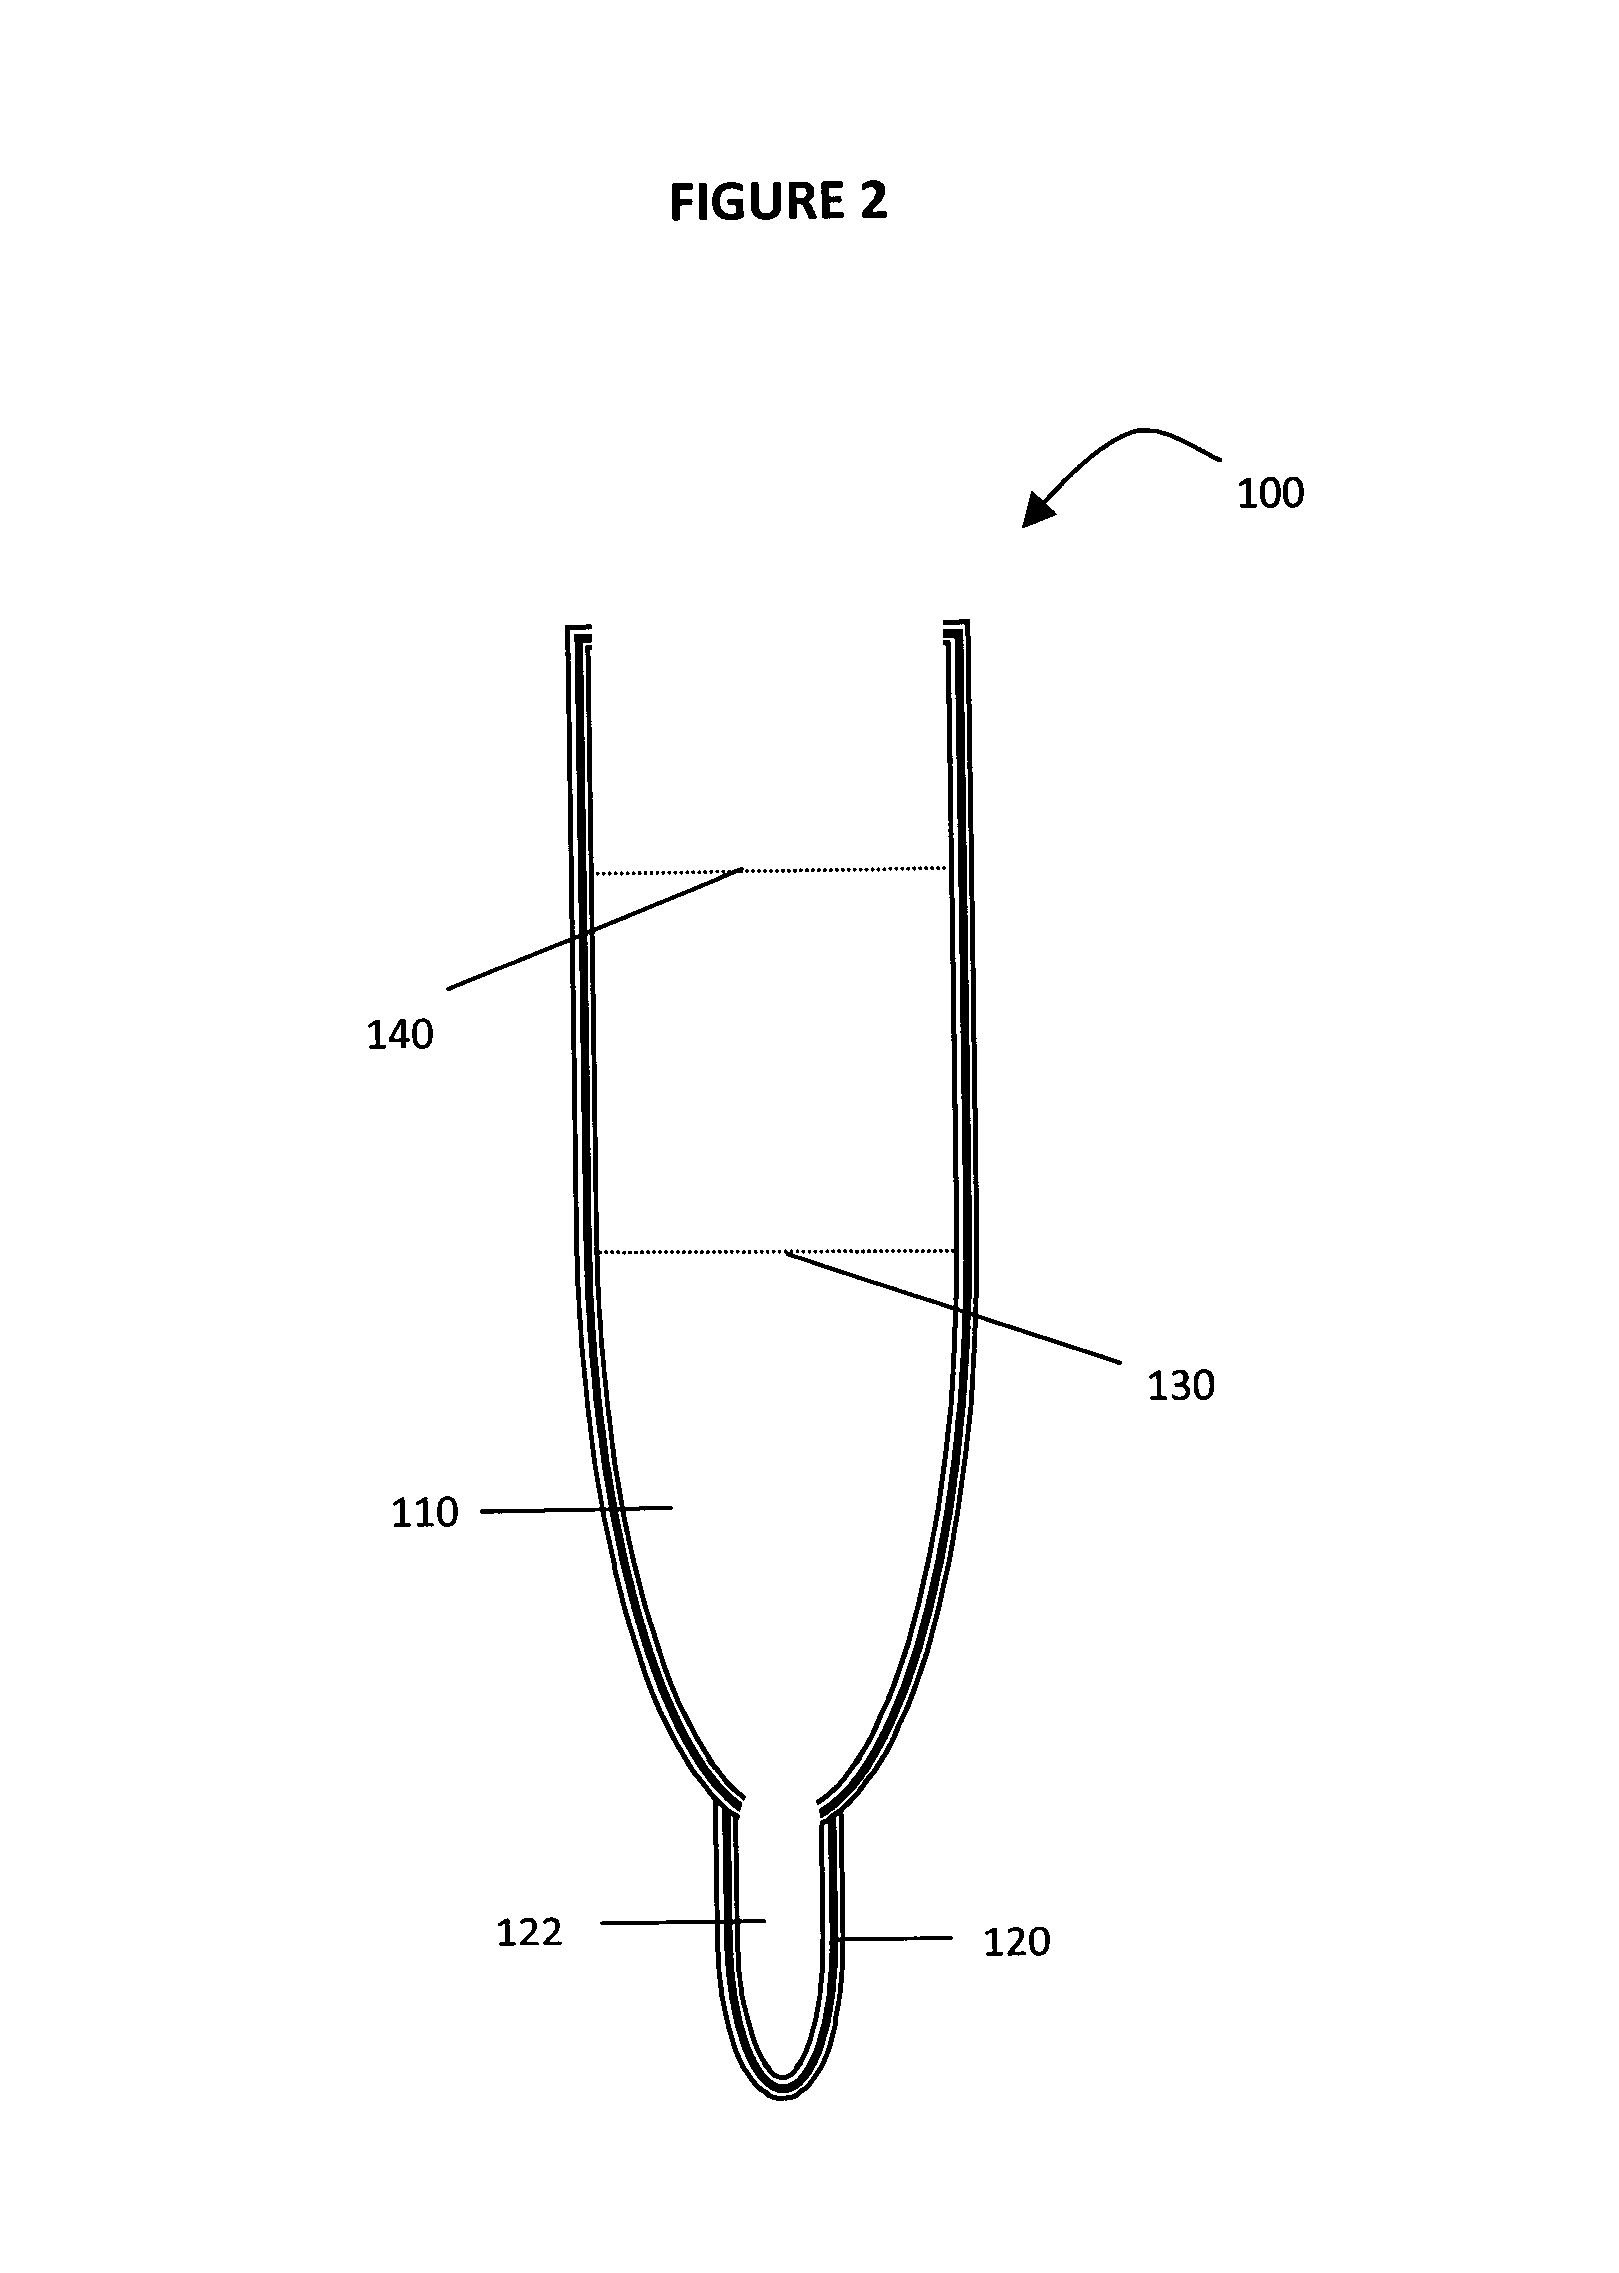 Systems and methods for preparing samples for chemical analysis